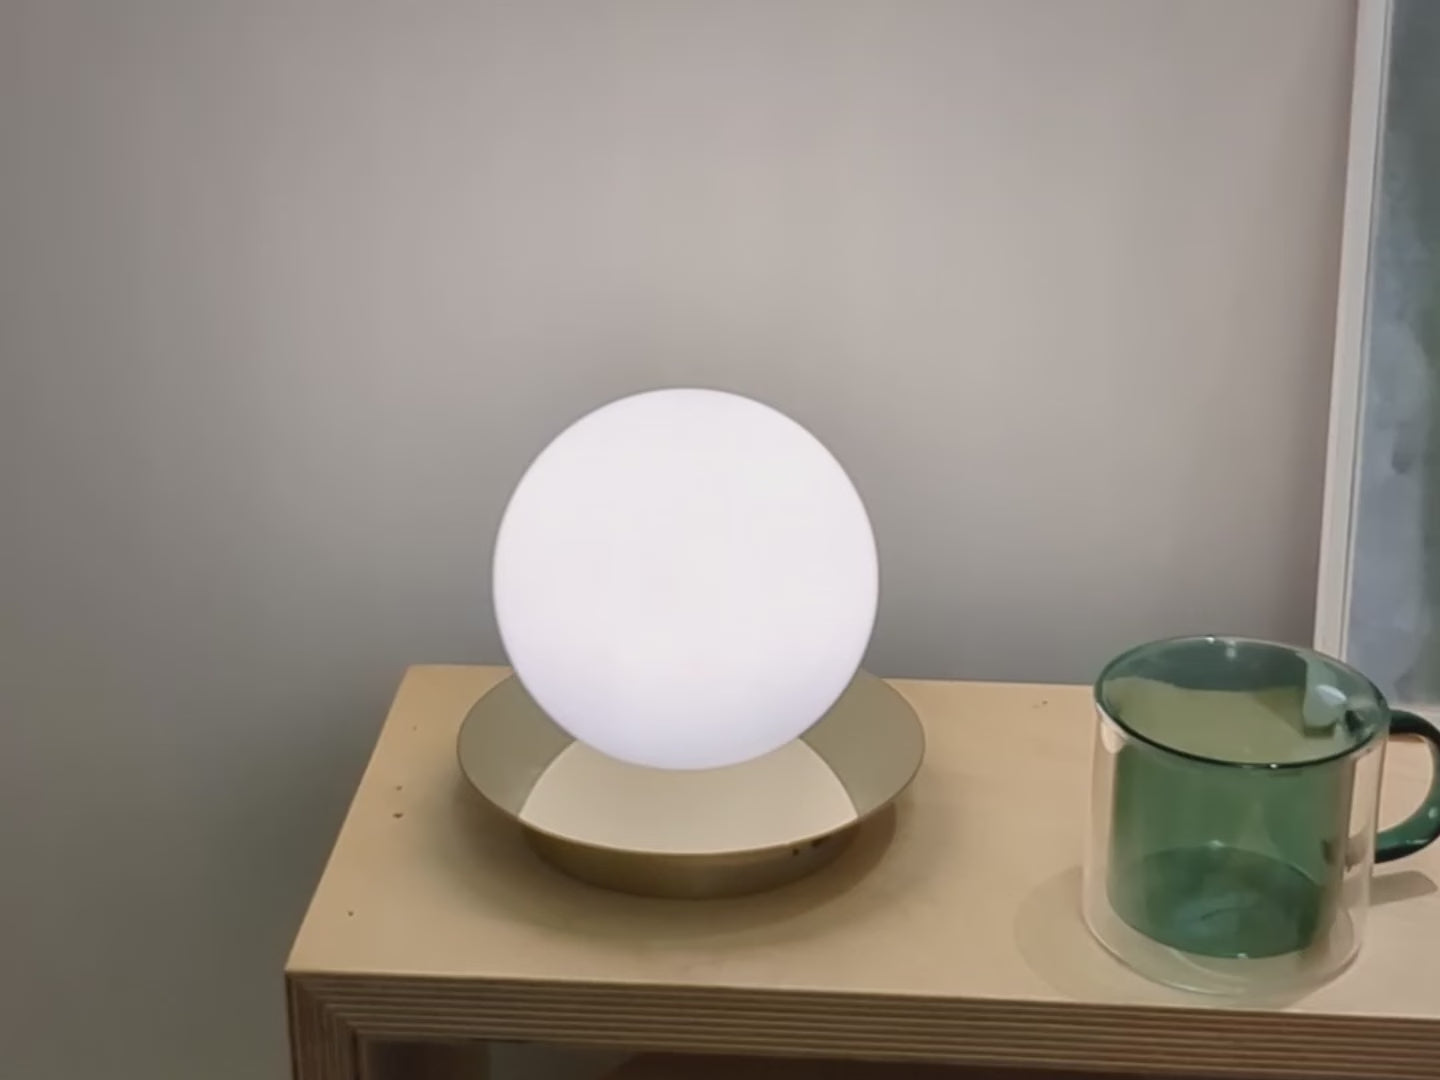 An opal glass shade sits upon a metal disk. The opal glass shade contains an integrated LED bulb that can be recharged. The lamp is portable and wireless. Light is on and on a bedside table.